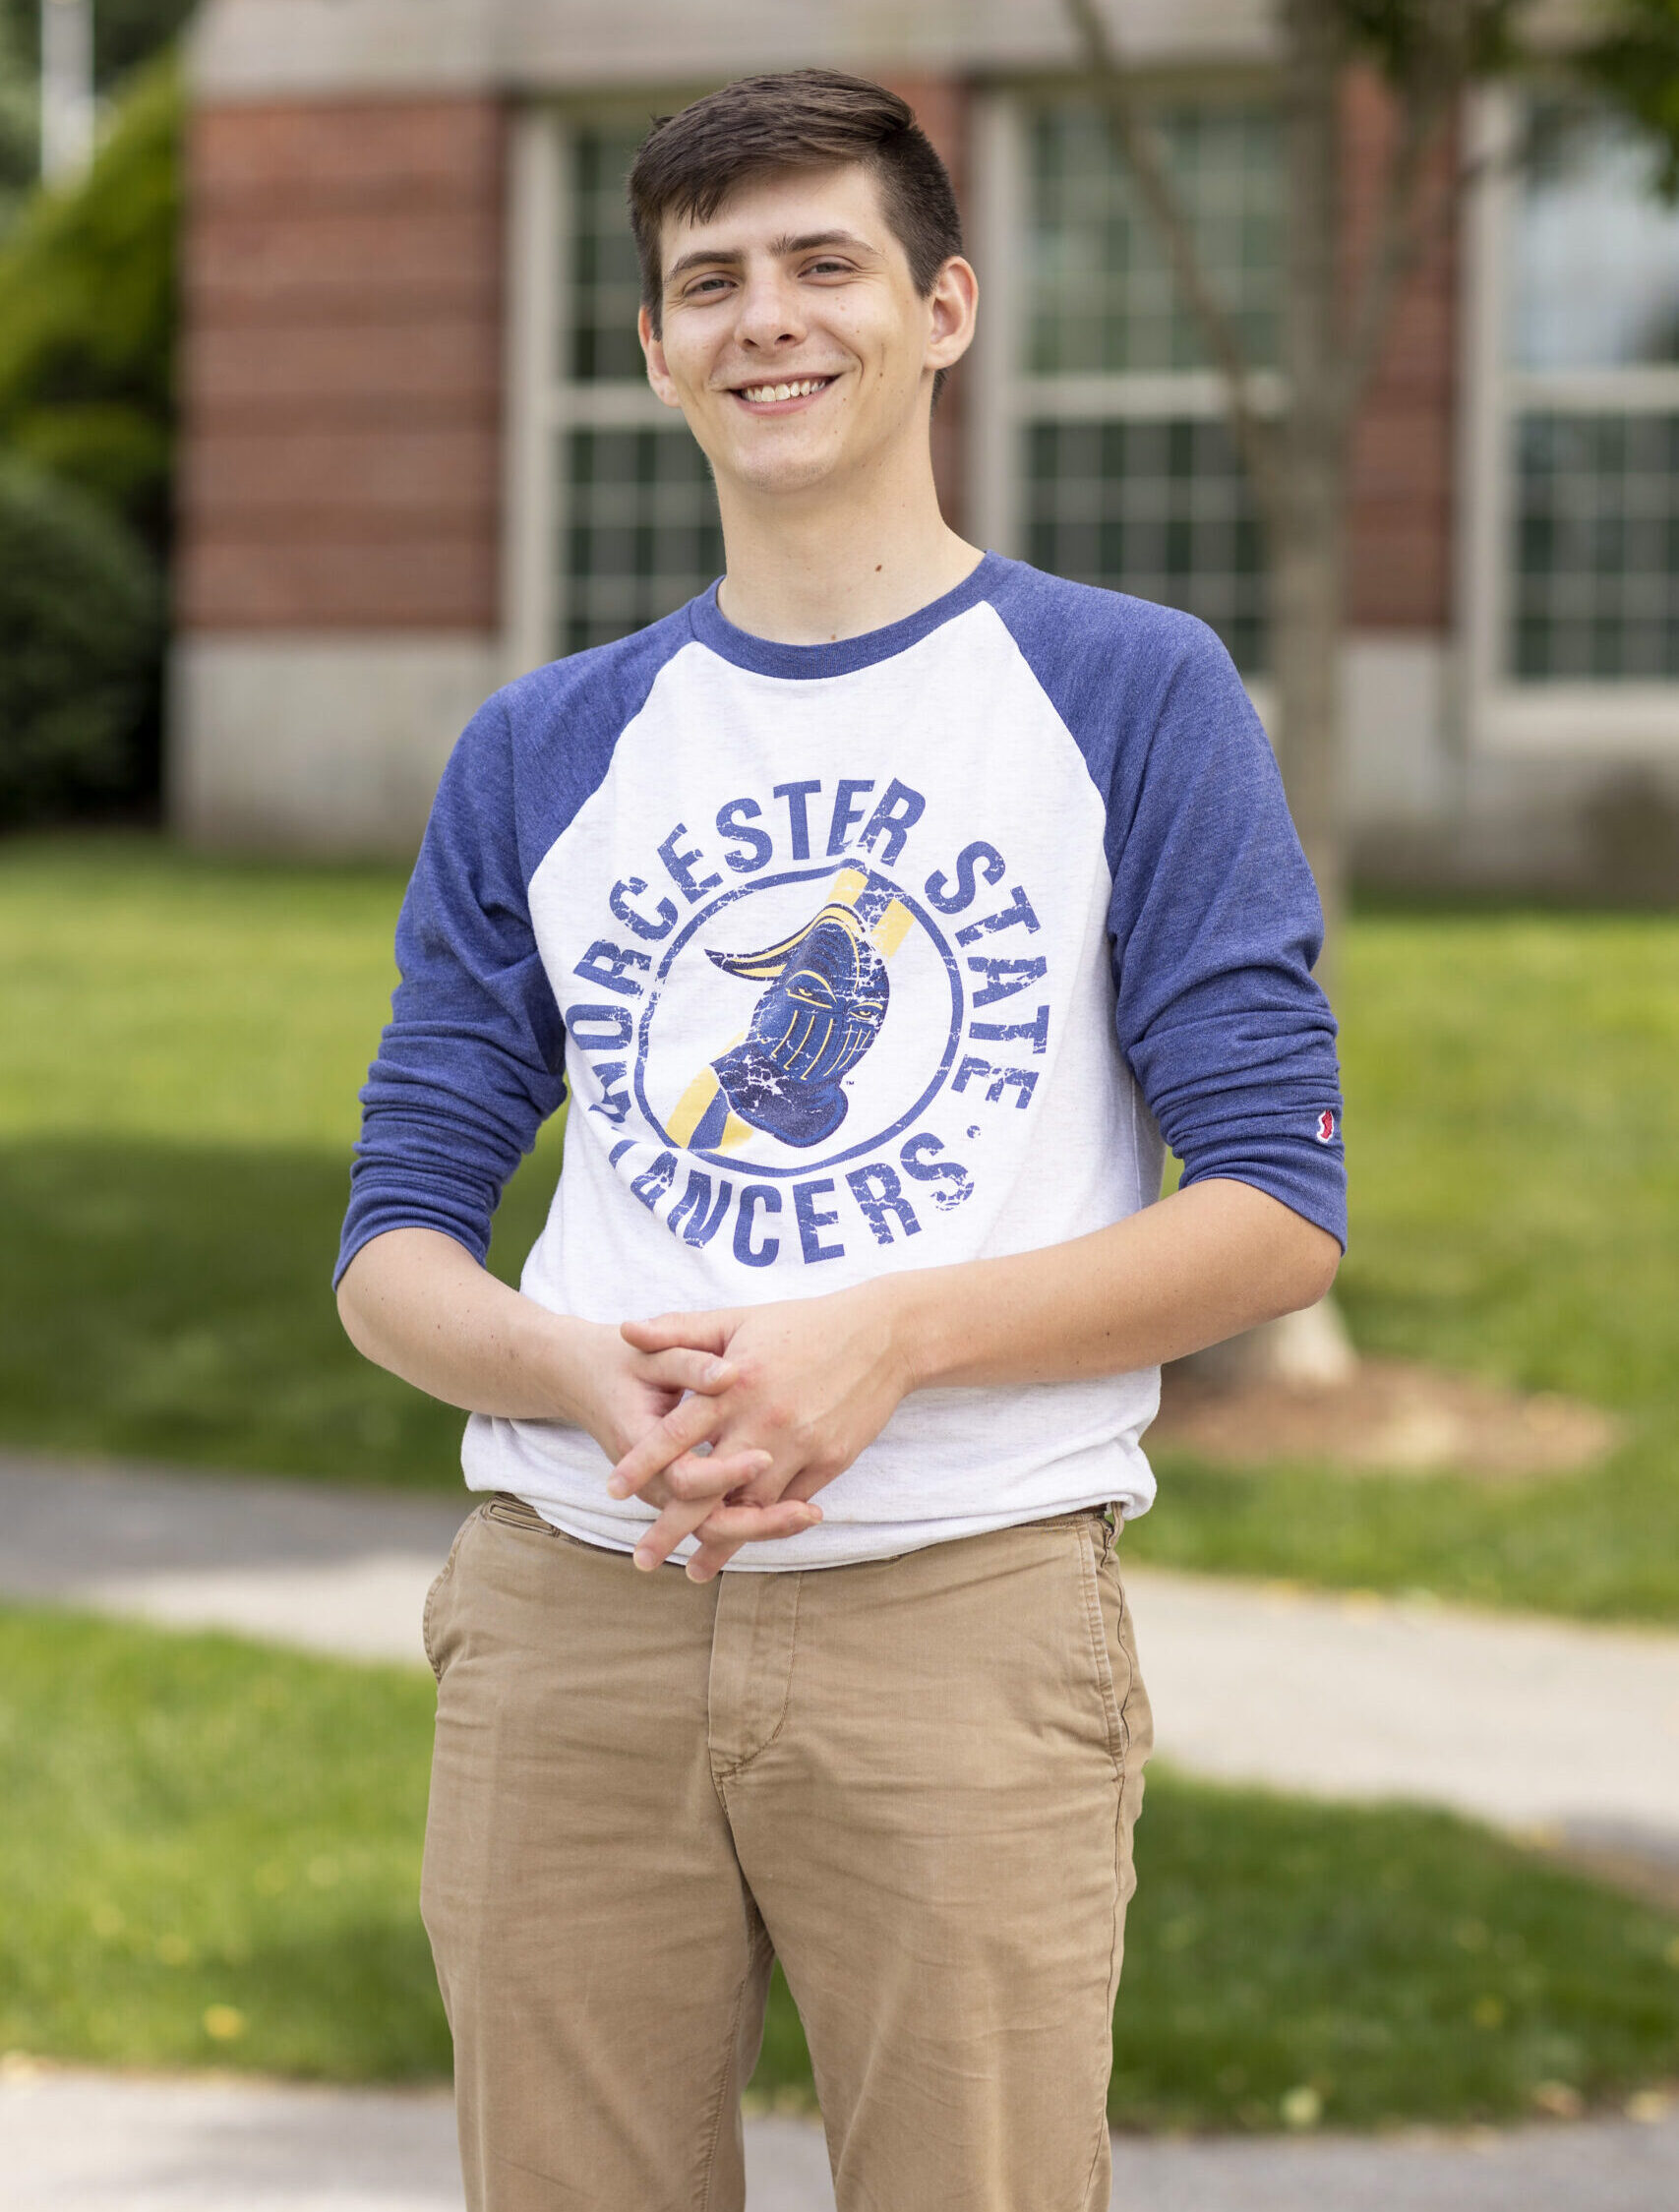 A smiling Worcester State student standing outside holding their hands